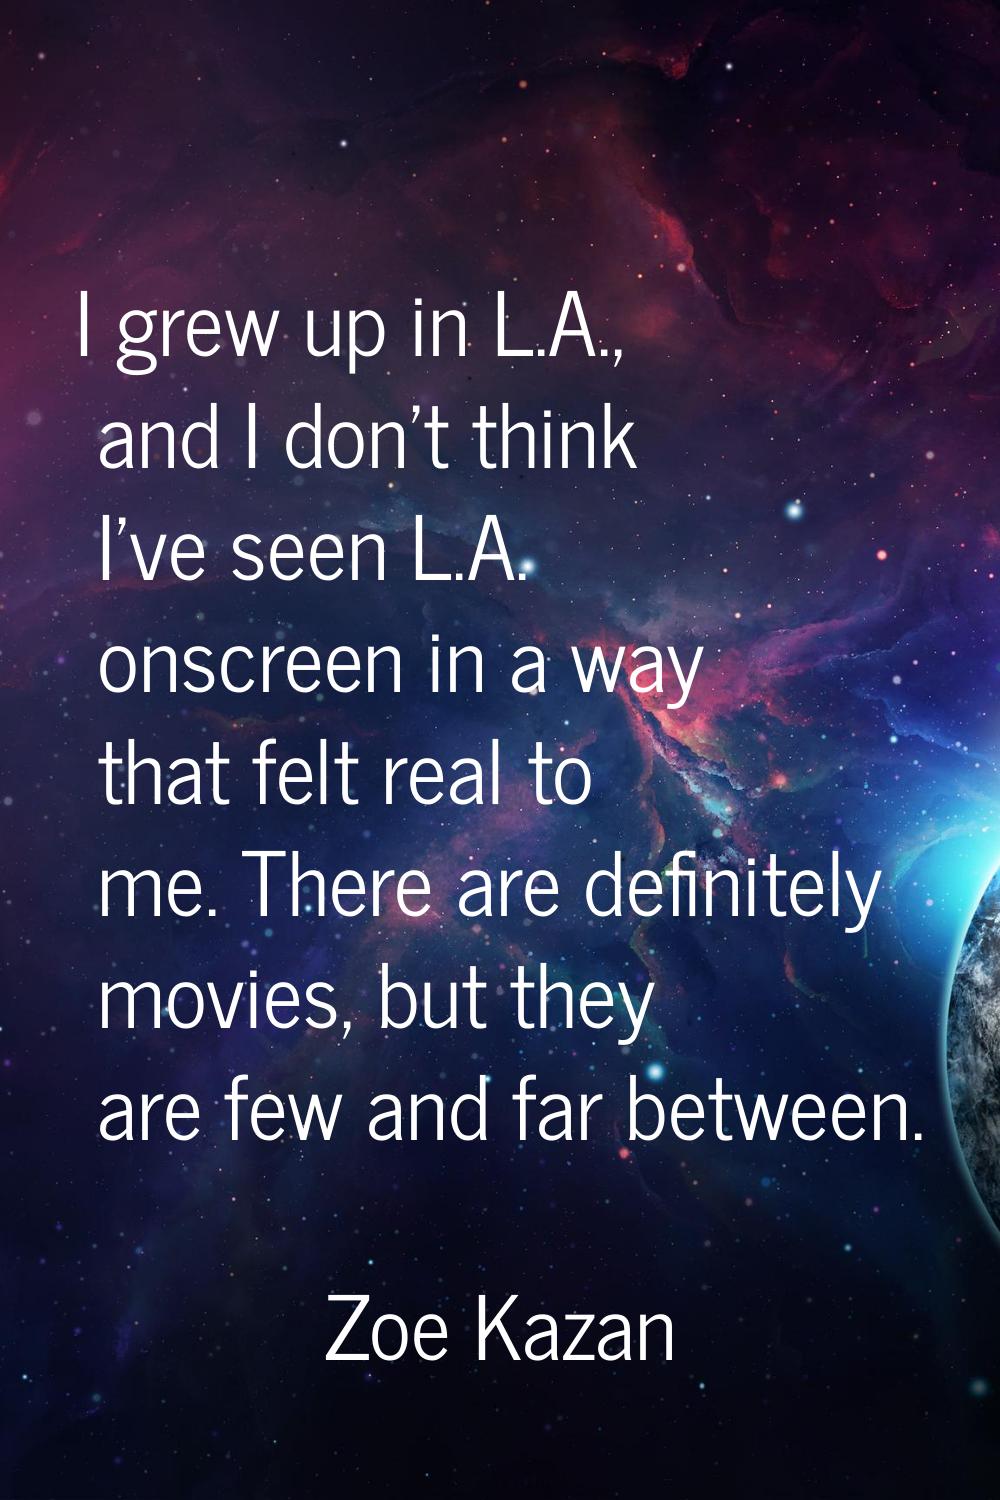 I grew up in L.A., and I don't think I've seen L.A. onscreen in a way that felt real to me. There a